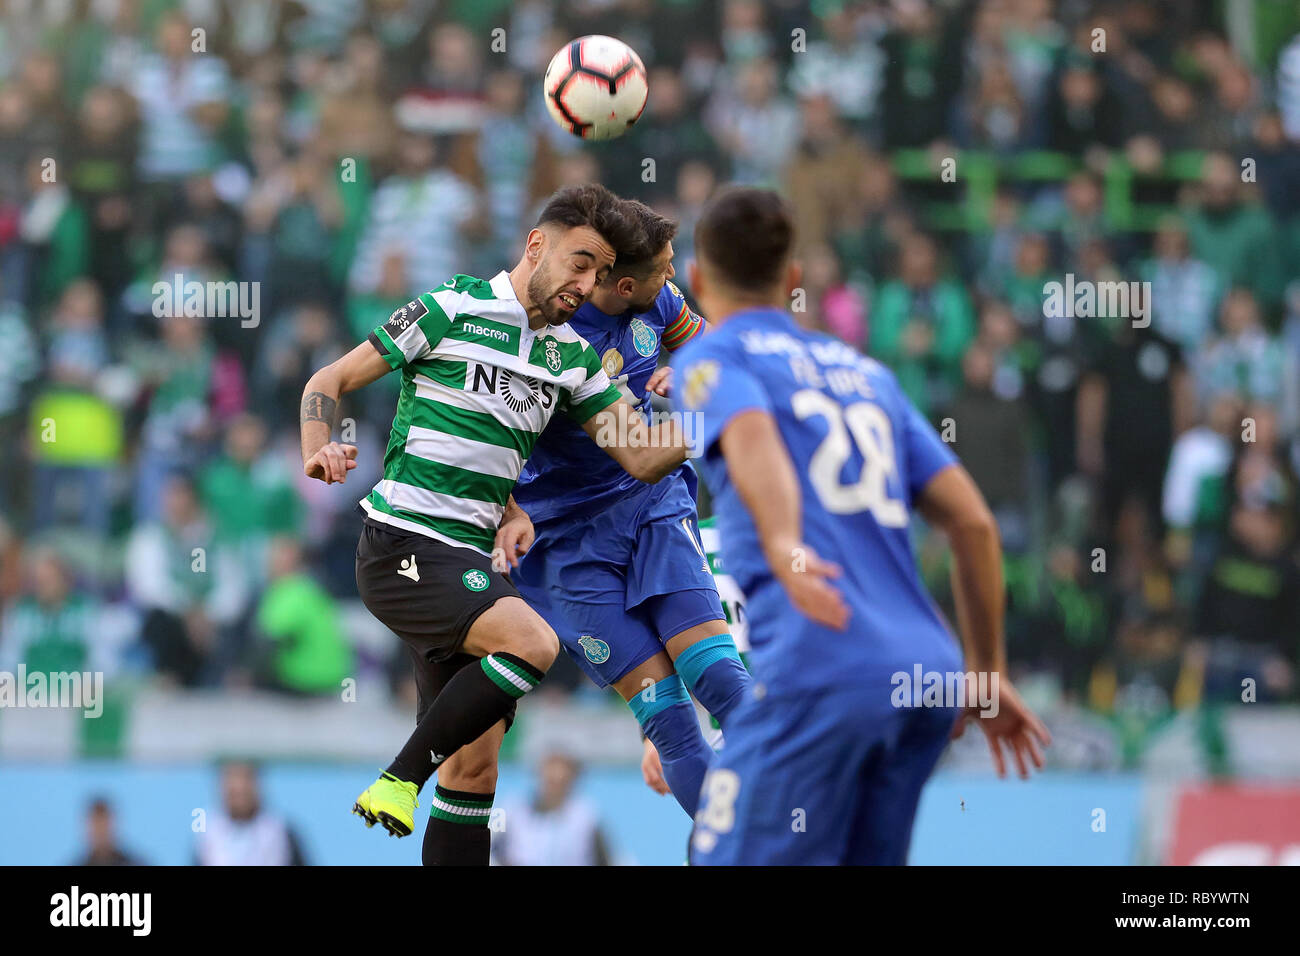 Bruno Fernandes of Sporting CP (L) and Héctor Herrera of FC Porto (R) during the League NOS 2018/19 football match between Sporting CP vs FC Porto. (Final score: Sporting CP 0 - 0 FC Porto) Stock Photo